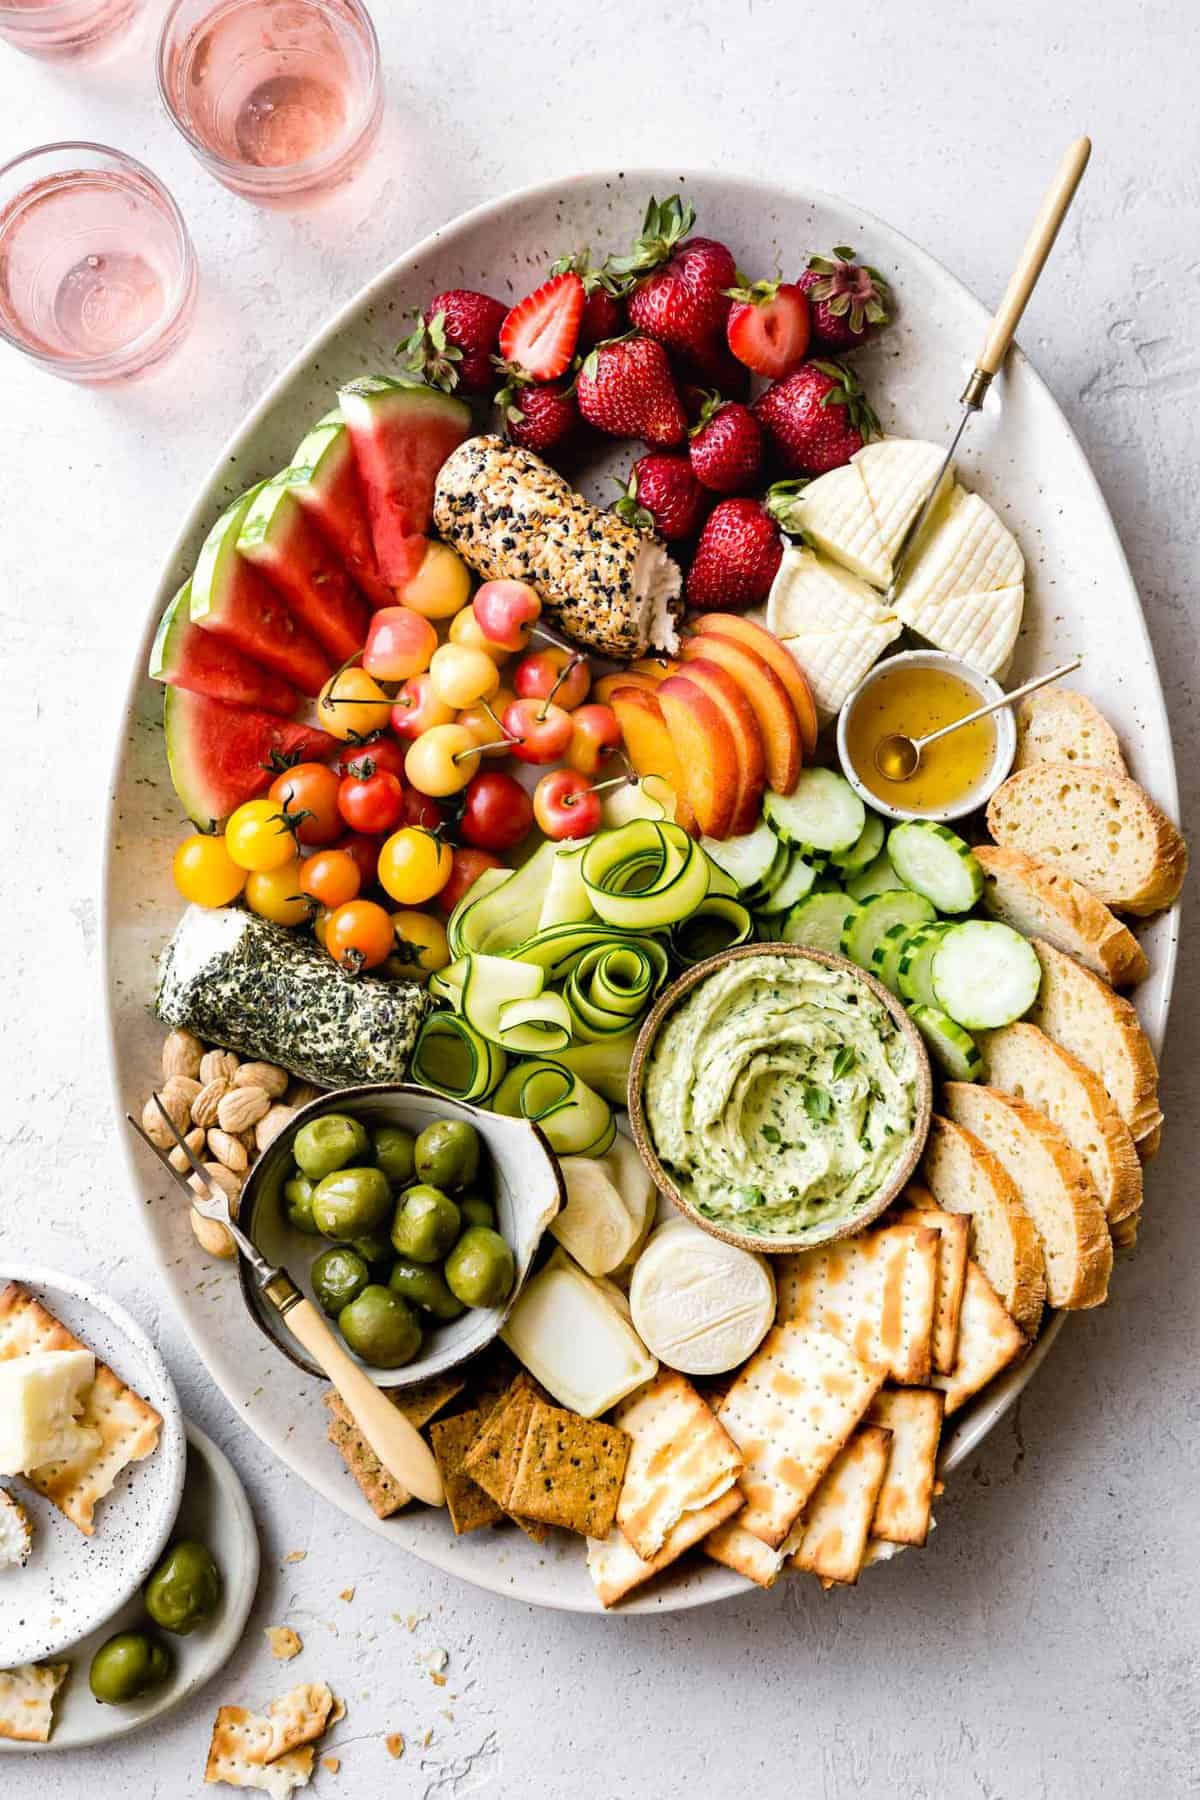 oval platter loaded with a rainbow of vibrant summer fruits and vegetables, cheeses, bread, and crackers